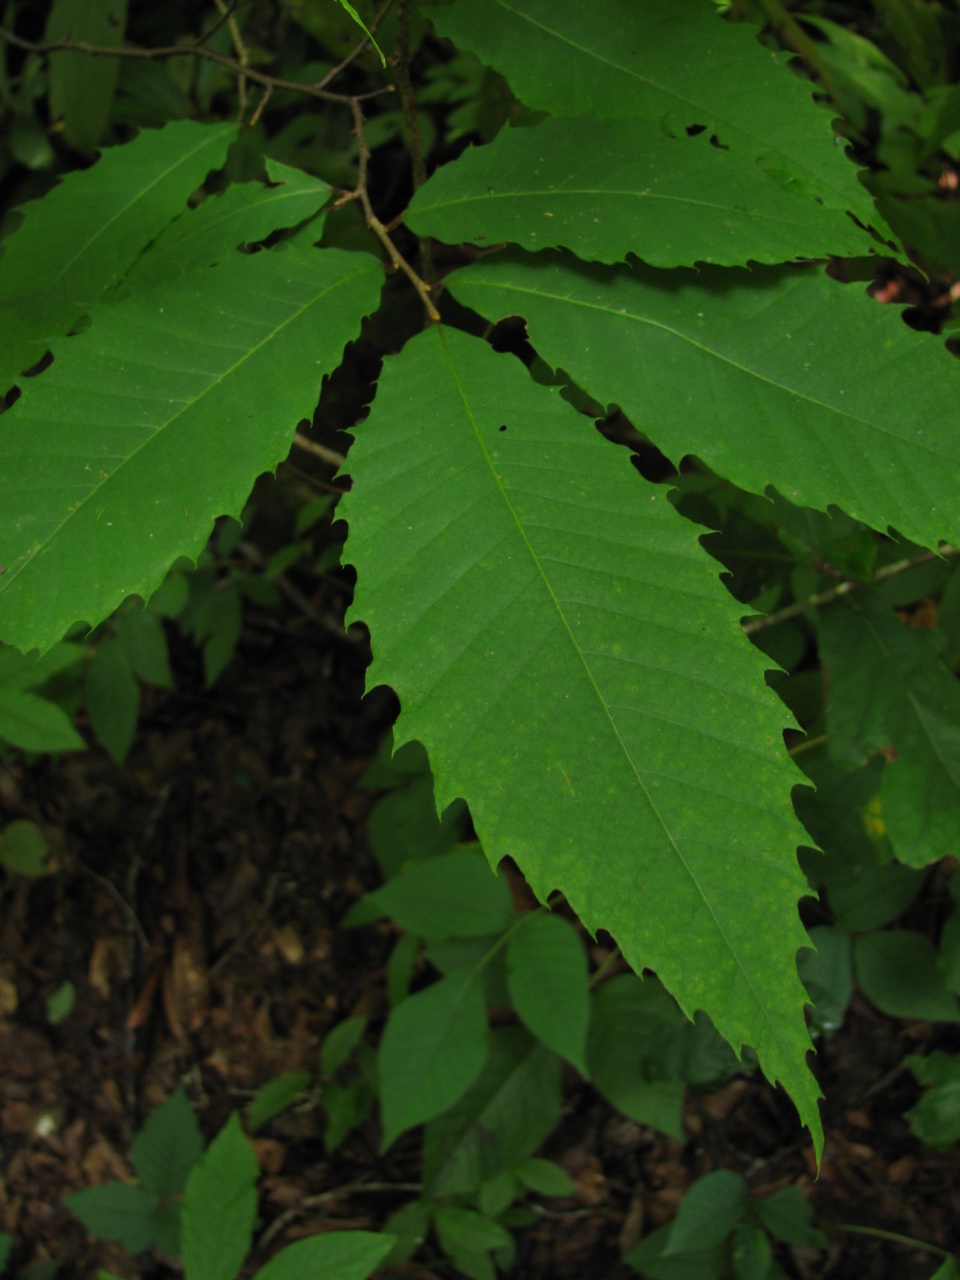 The Scientific Name is Castanea dentata. You will likely hear them called American Chestnut. This picture shows the Strongly and evenly toothed margins along the entire length of the leaves of Castanea dentata